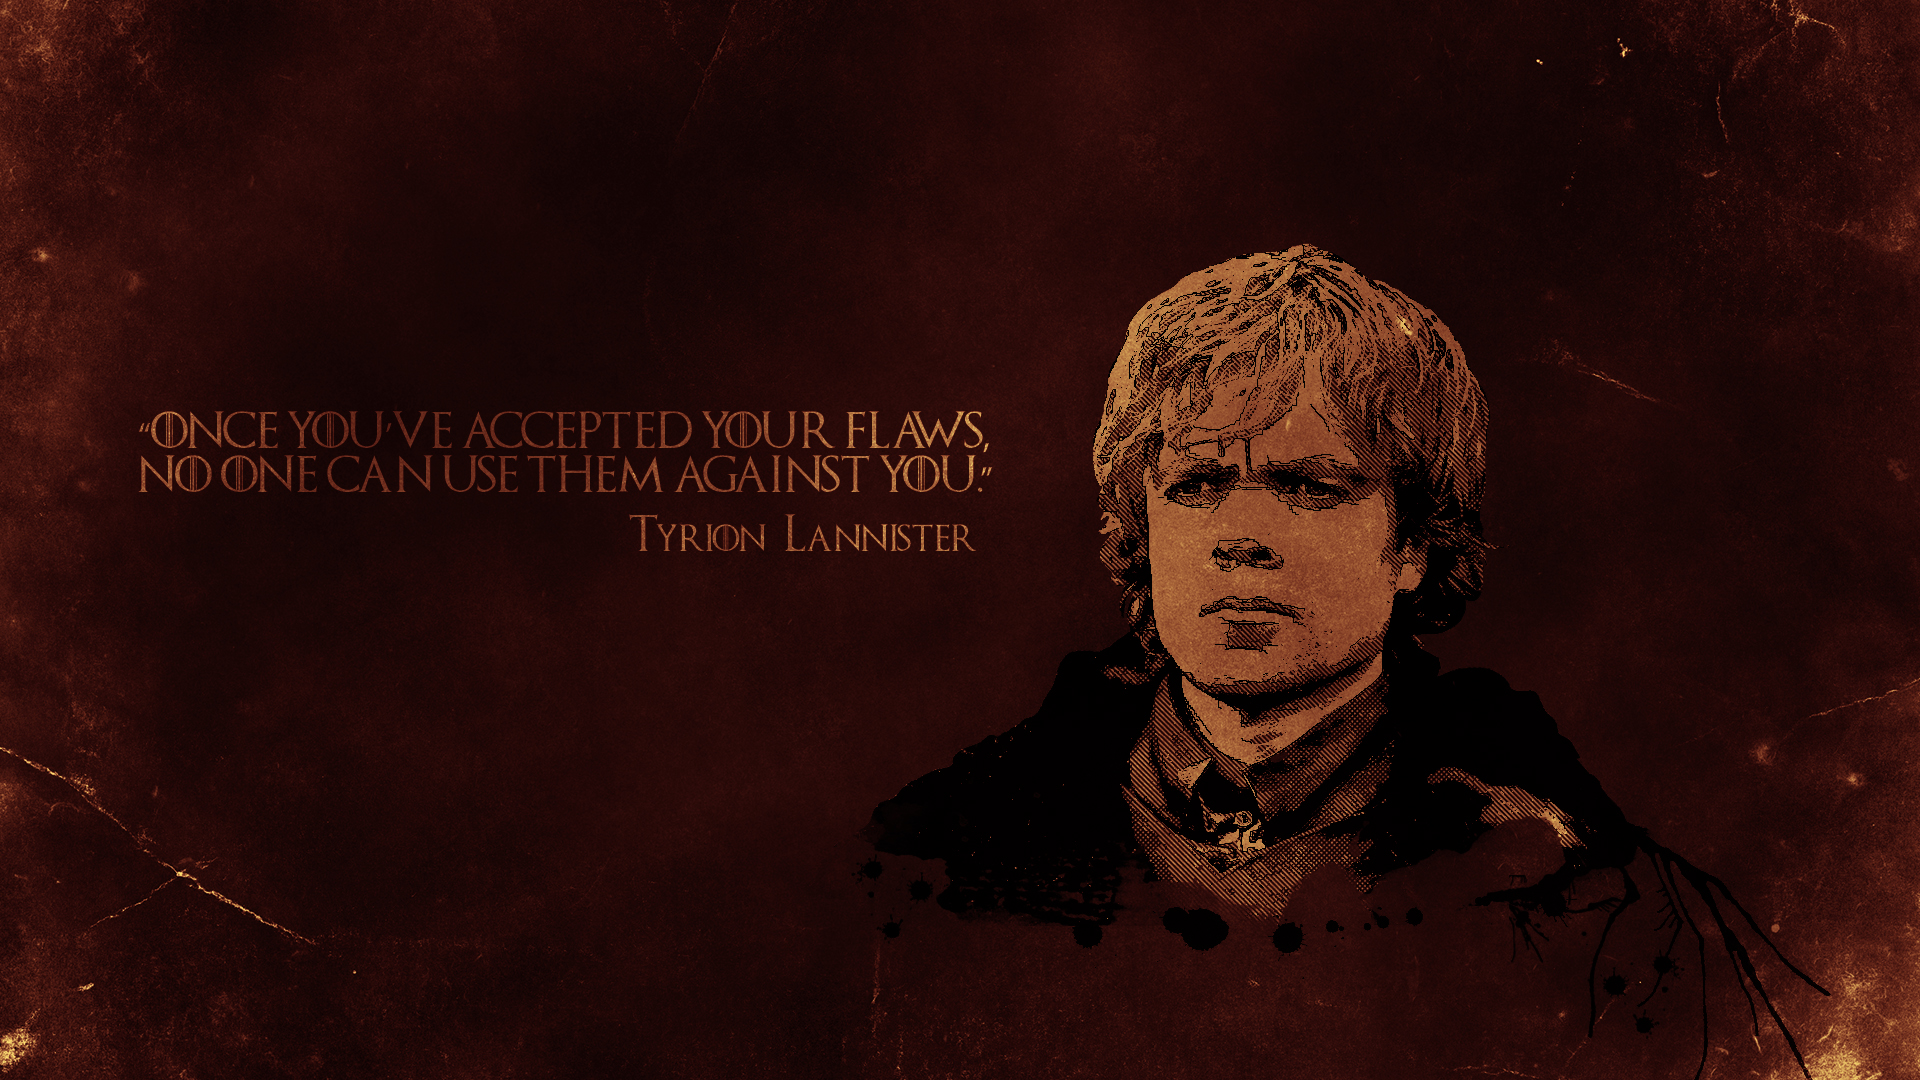 tyrion lannister, tv show, game of thrones